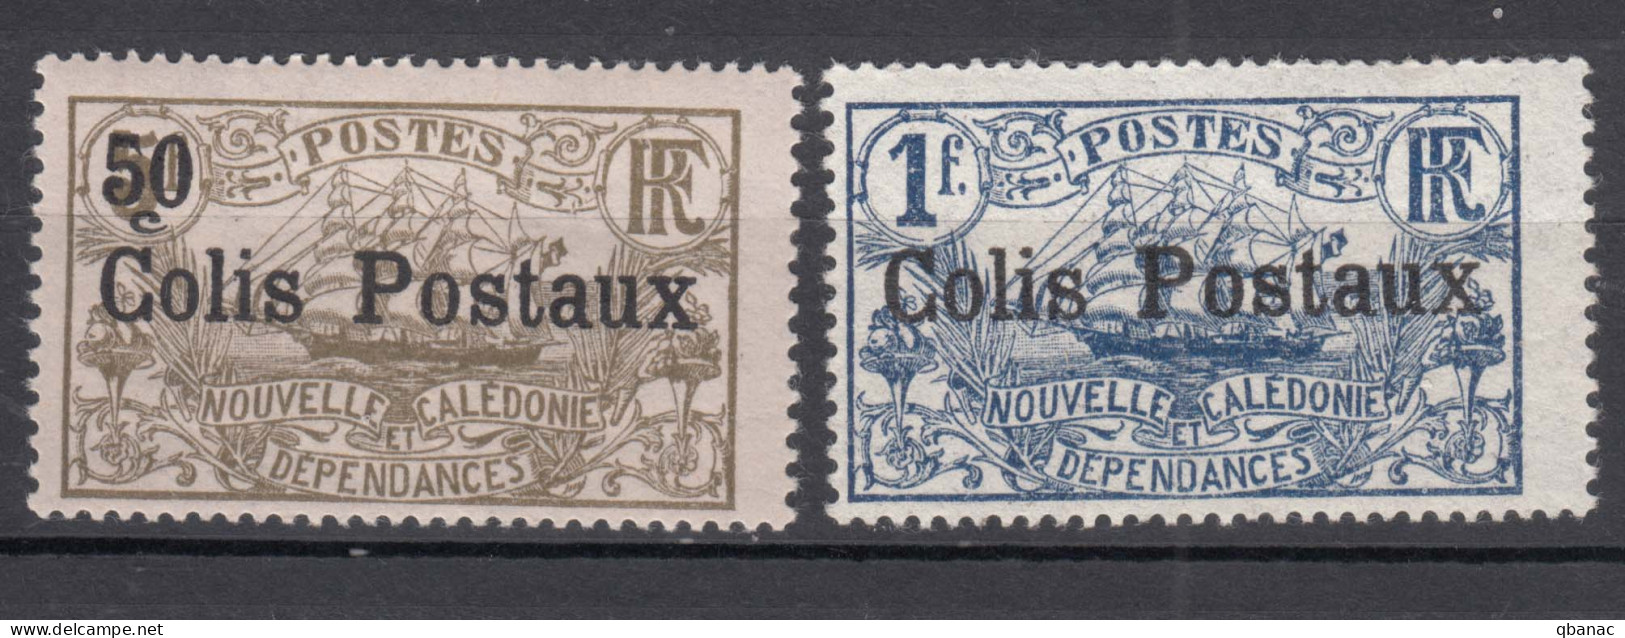 New Caledonia Nouvelle Caledonie 1926 Colis Postaux Yvert#1,2 Mint Hinged - Neufs